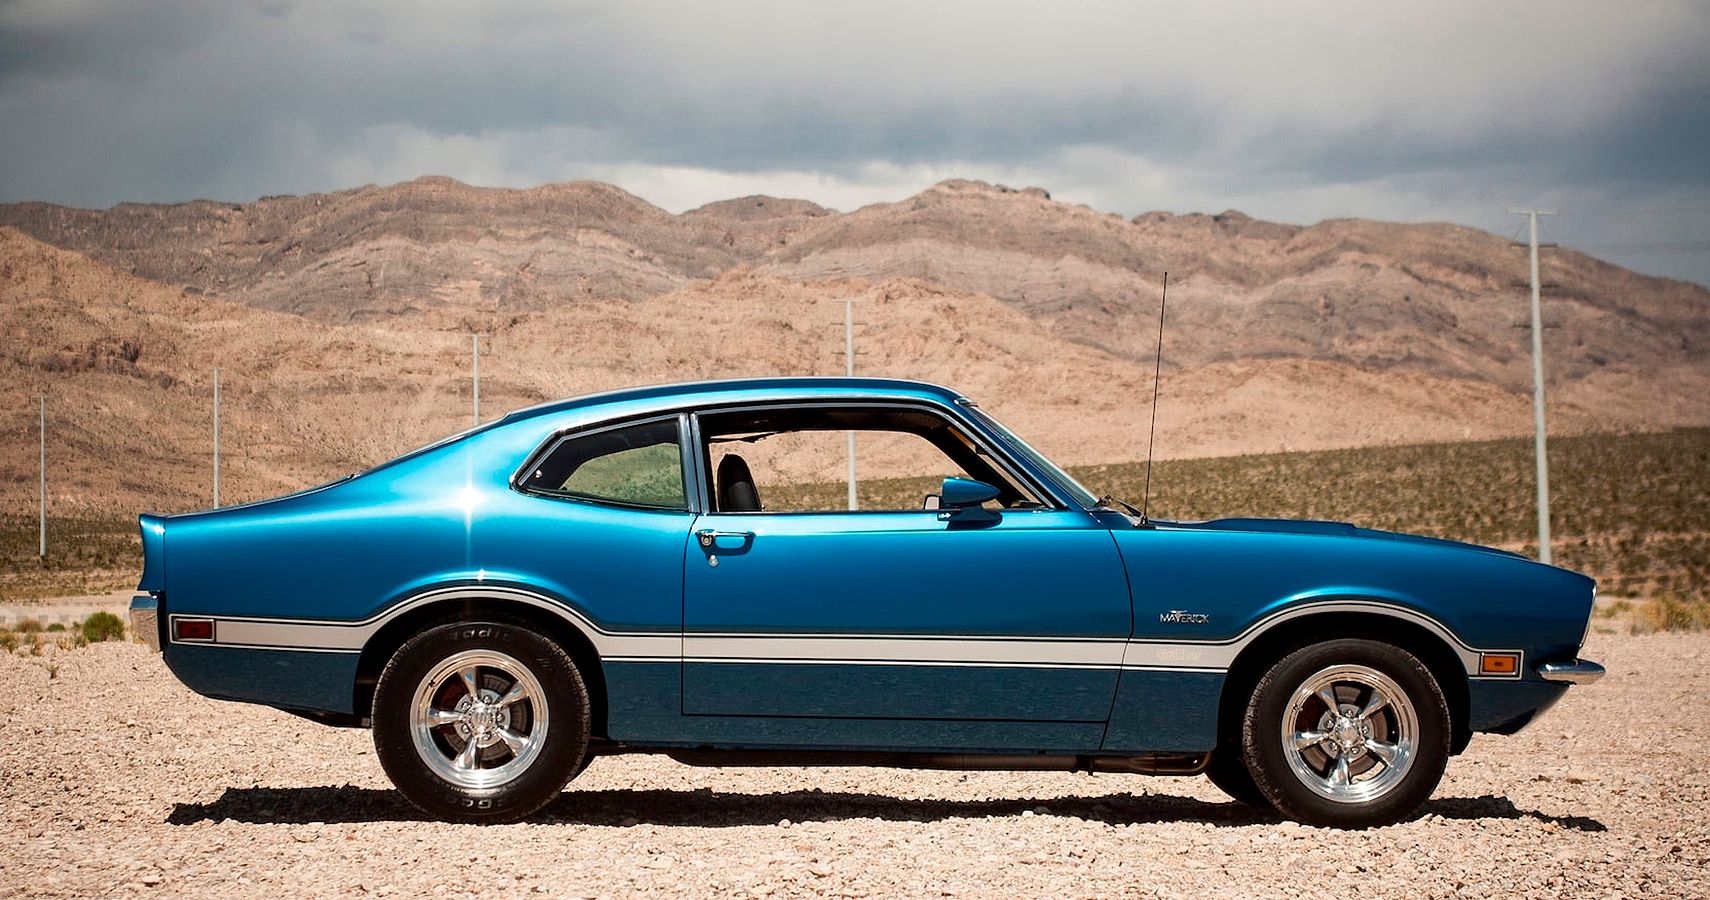 These Classic American Cars Will Crumble After 50,000 Miles